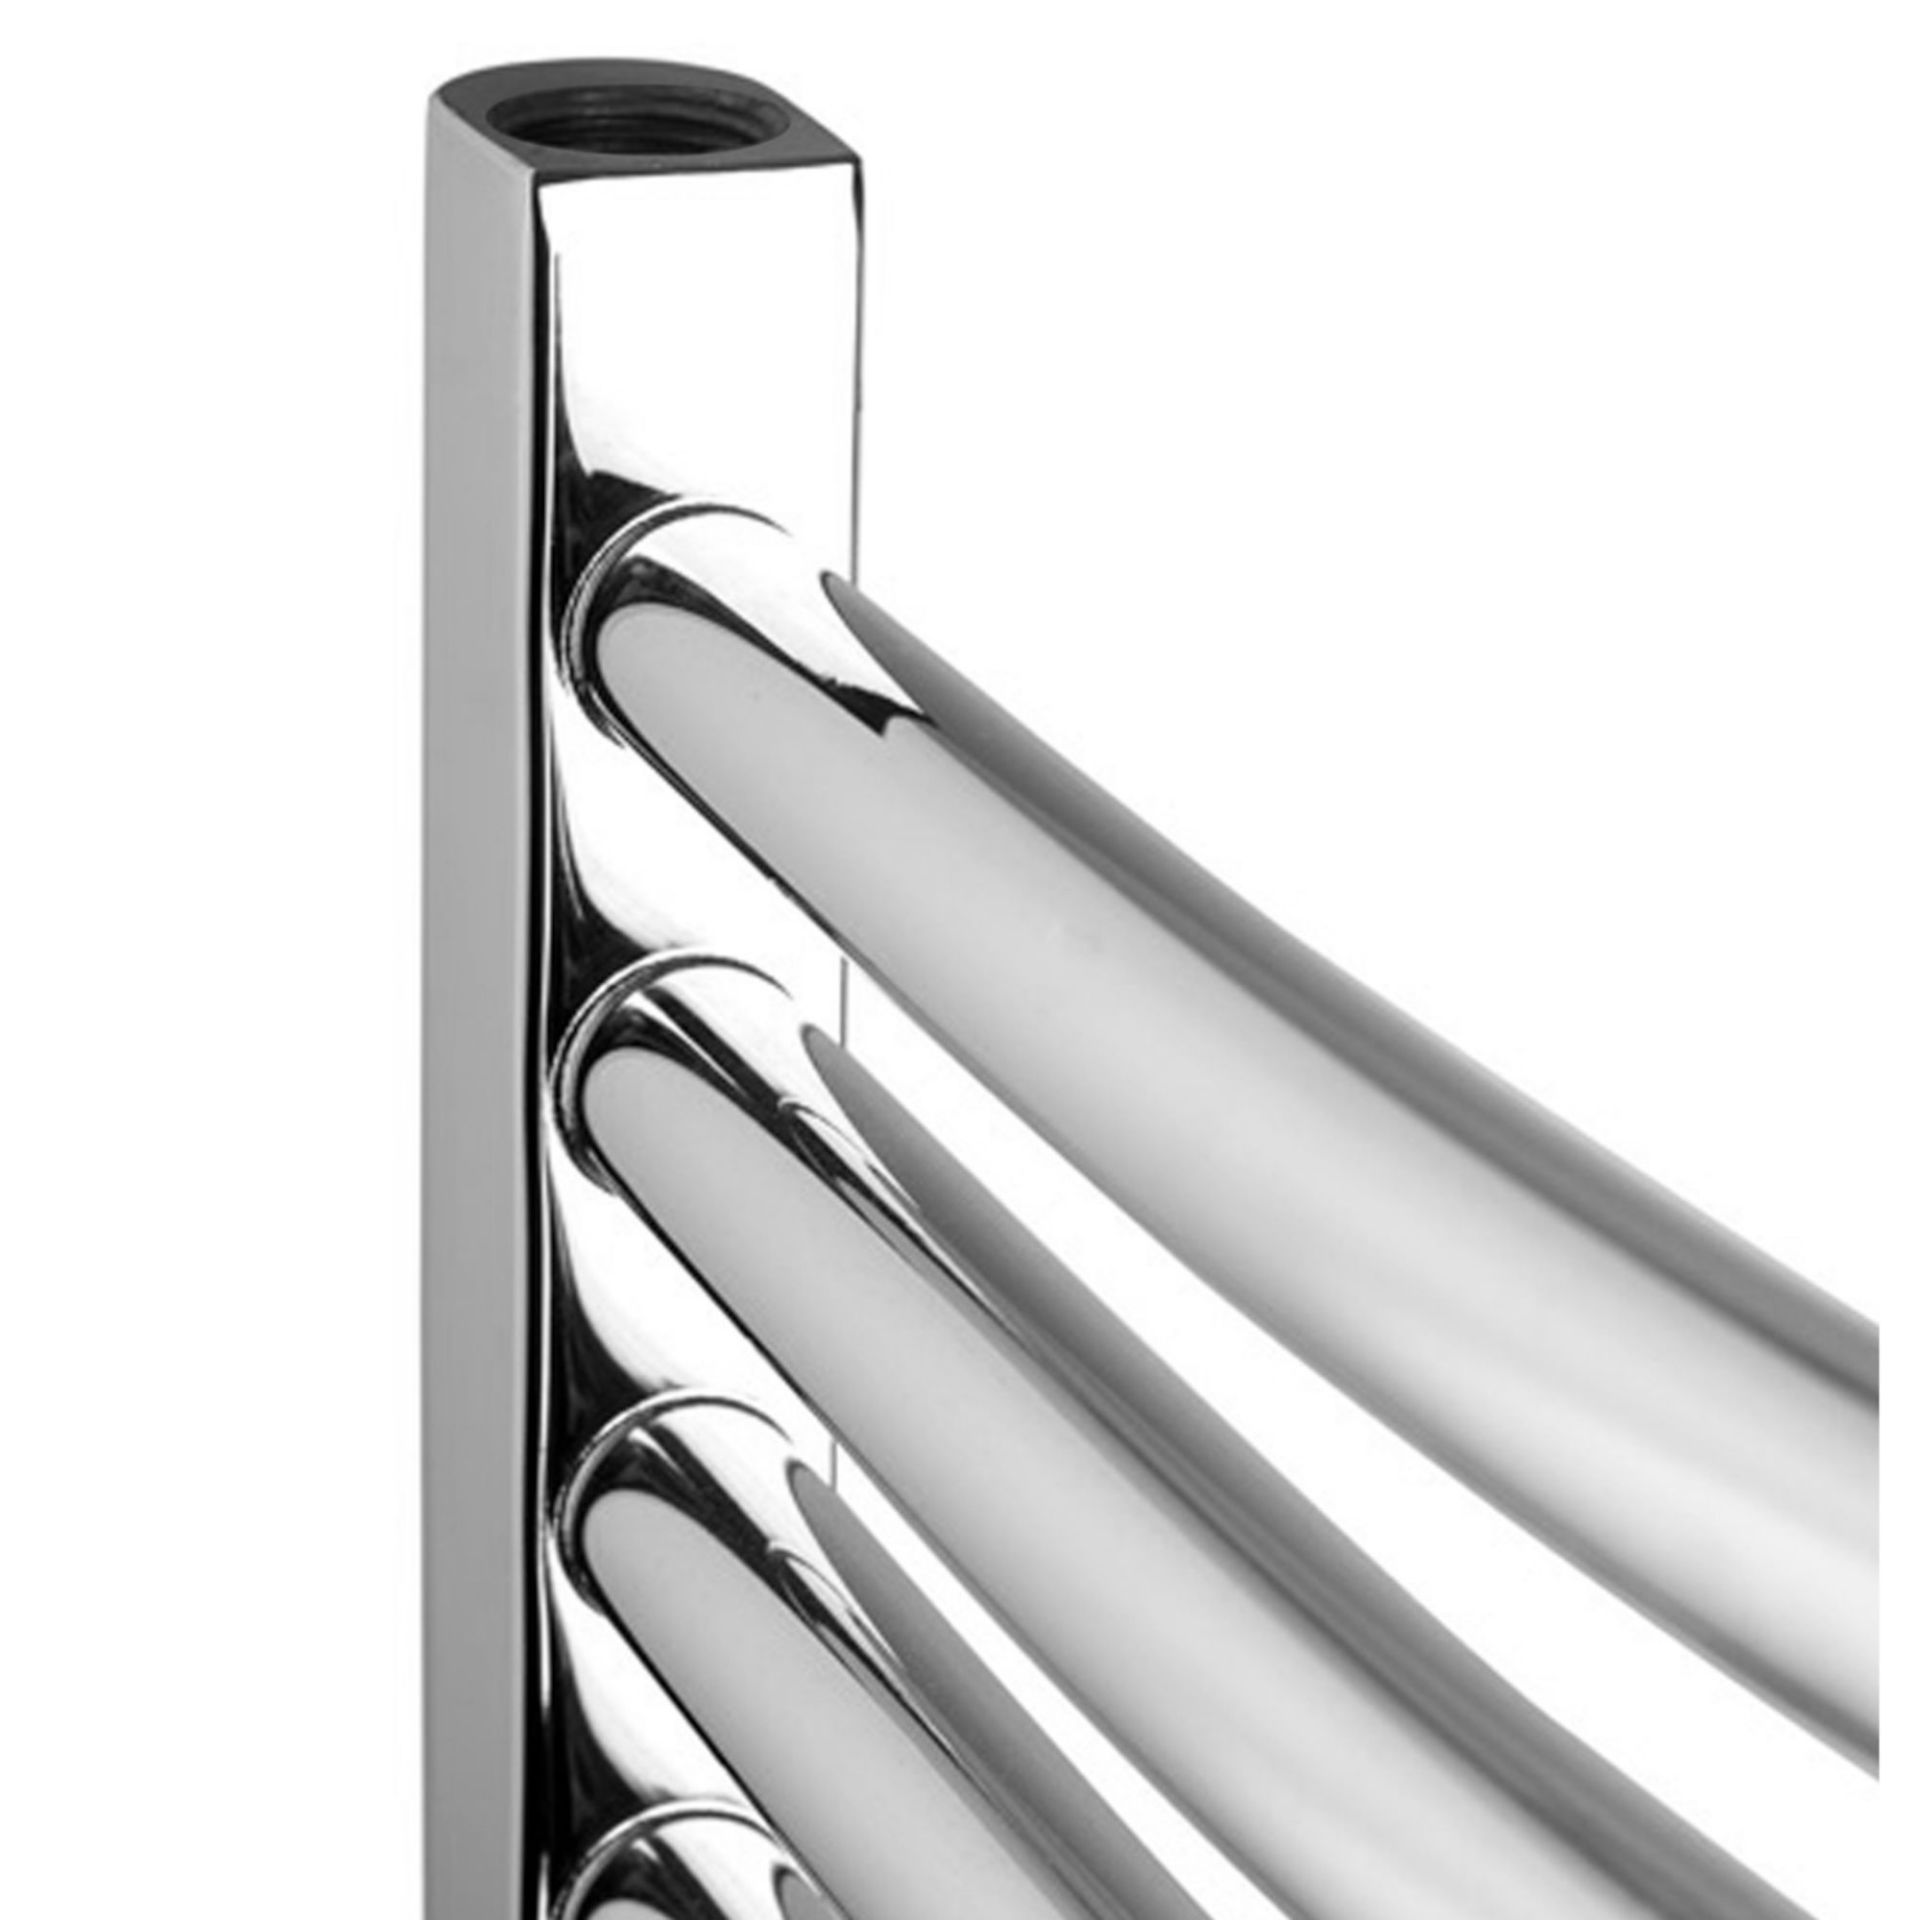 1200x600mm - 20mm Tubes - Chrome Curved Rail Ladder Towel Radiator. NC1200600. Made from chrome... - Image 3 of 3